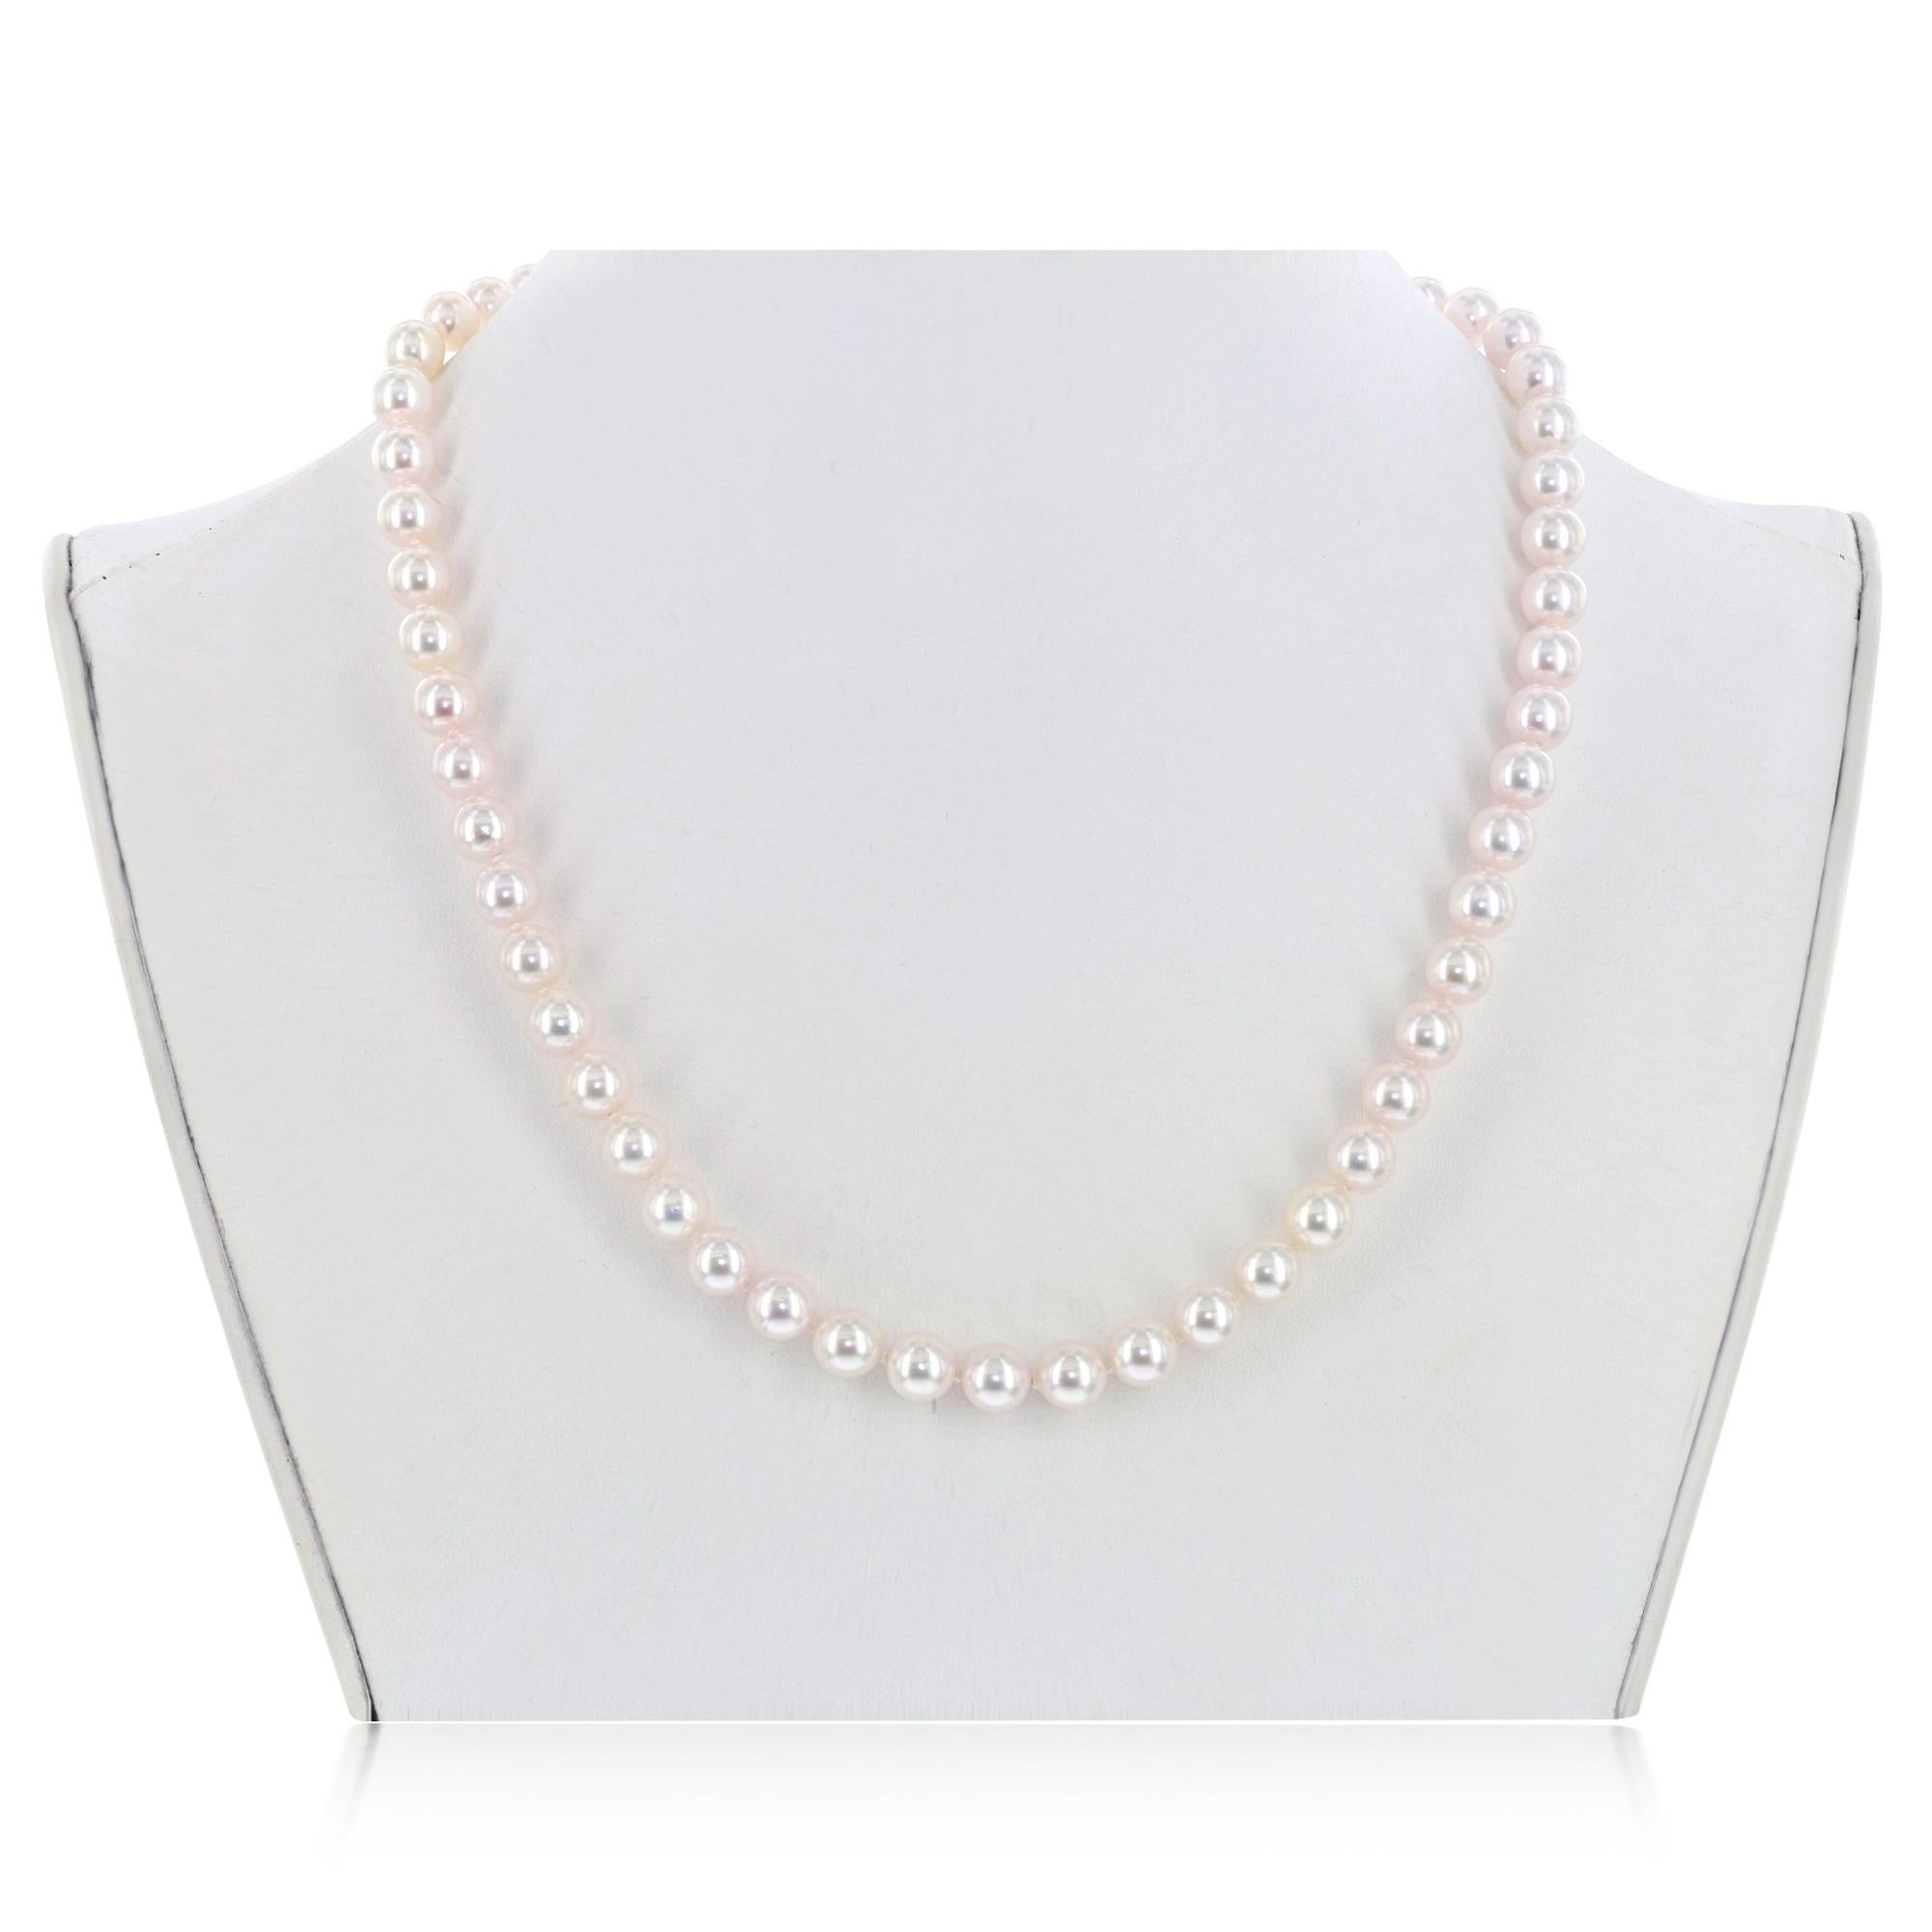 This Japanese Akoya cultured pearl necklace measures 7-7.5mm. This classic pearl necklace is strung to 18 inches with your choice of 14k Yellow or White Gold filigree clasp.
These pearls have excellent luster and clean, smooth skin, making it the